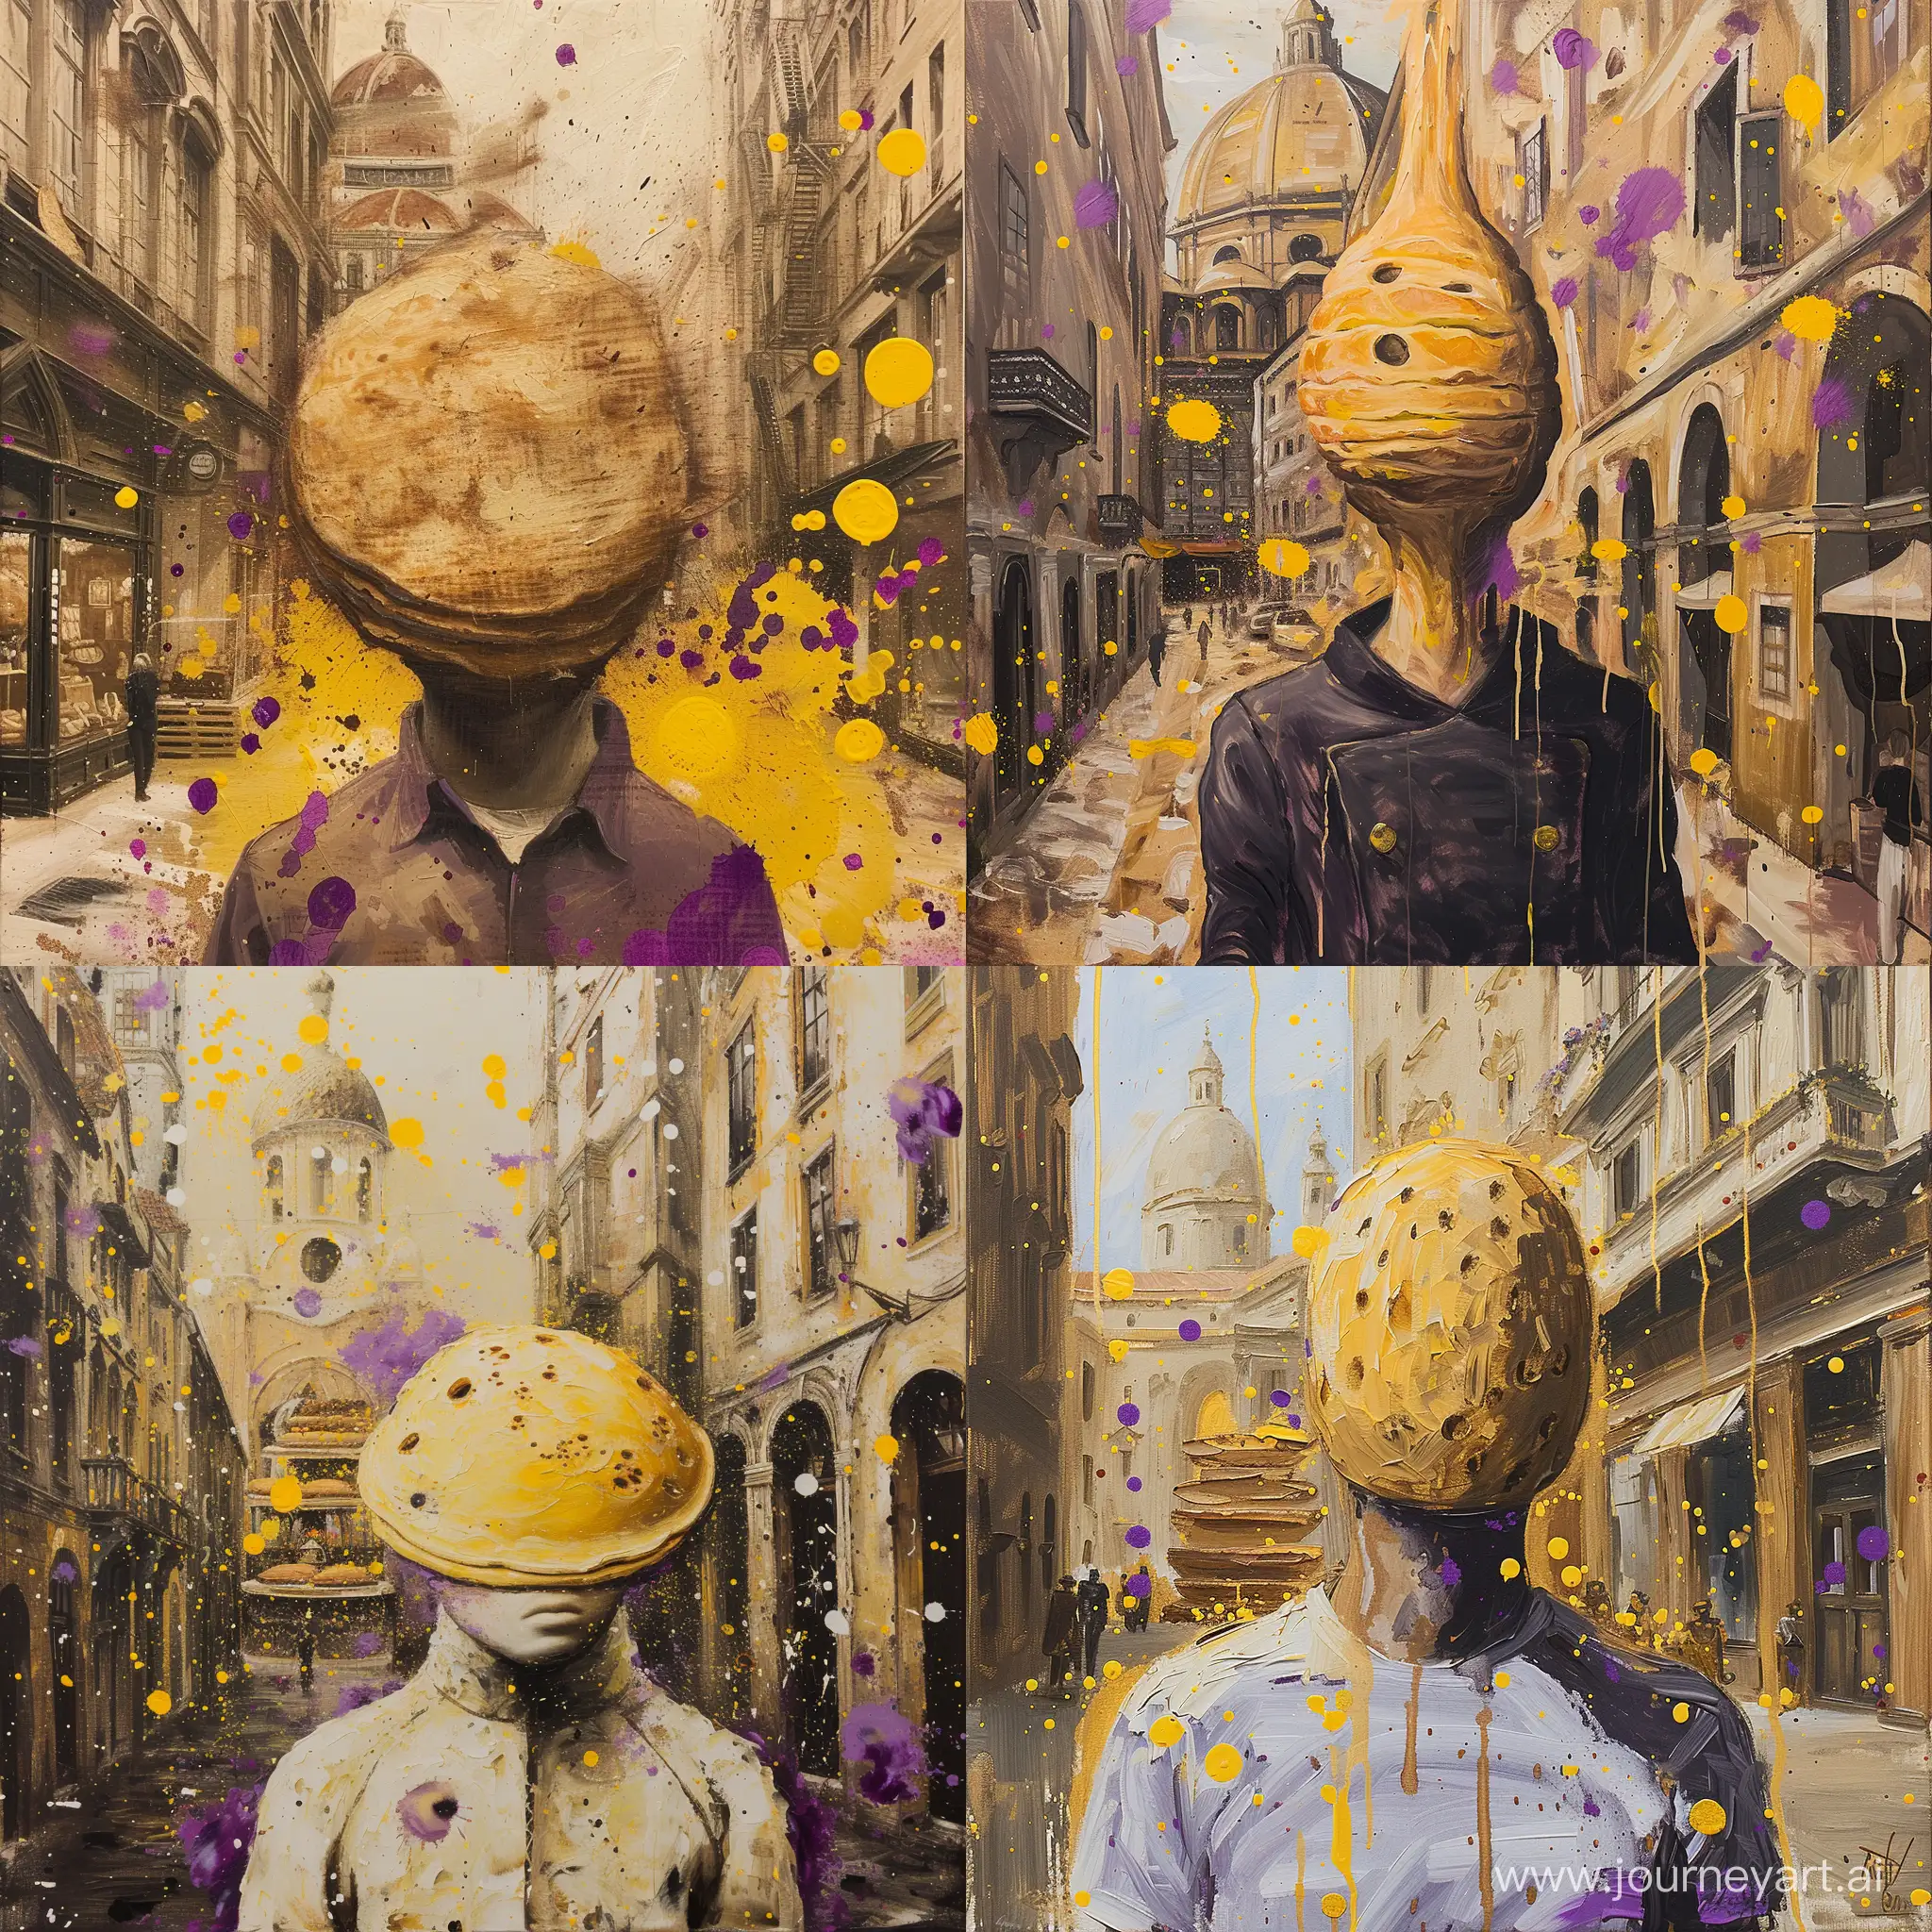 the painting is made in the anime style of the 90s, the painting is made in a stylized style, the painting depicts a man with a pancake head, the painting has partially yellow and purple oil paints and spots on the background, there is a bakery from the Renaissance in the background, the pancake man is located on a city street.